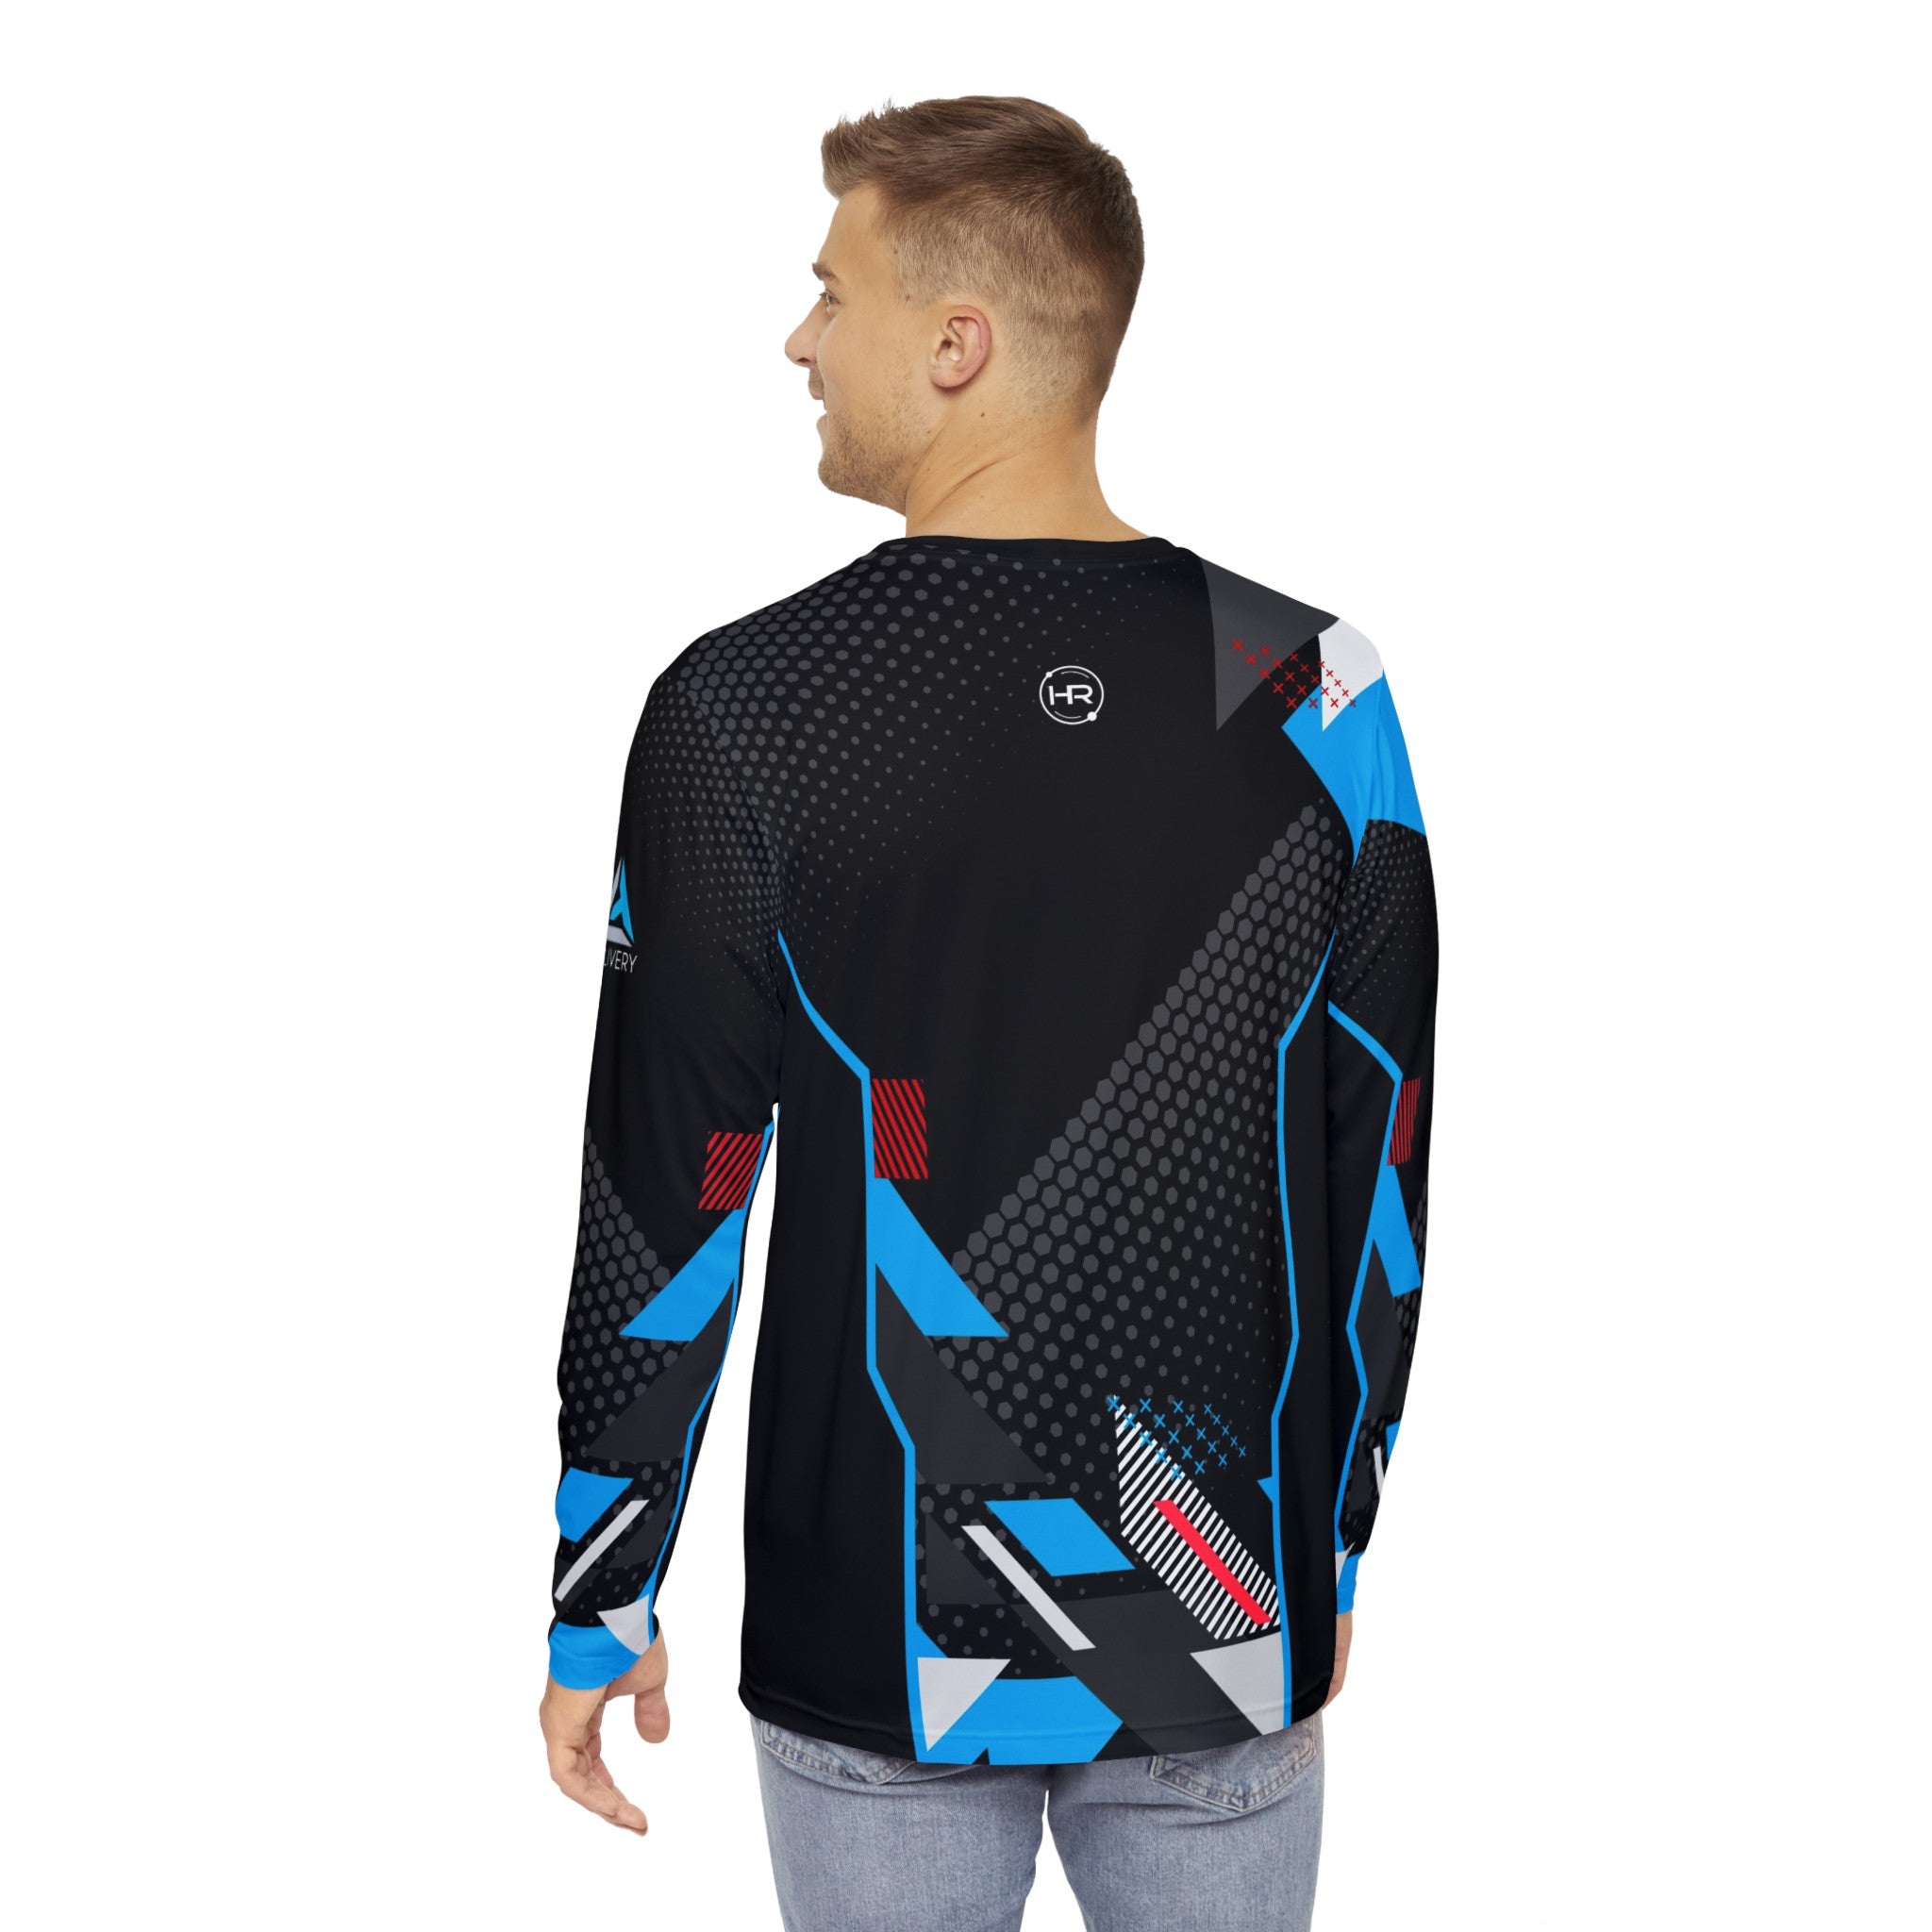 Hyperion Racing Long Sleeve Jersey